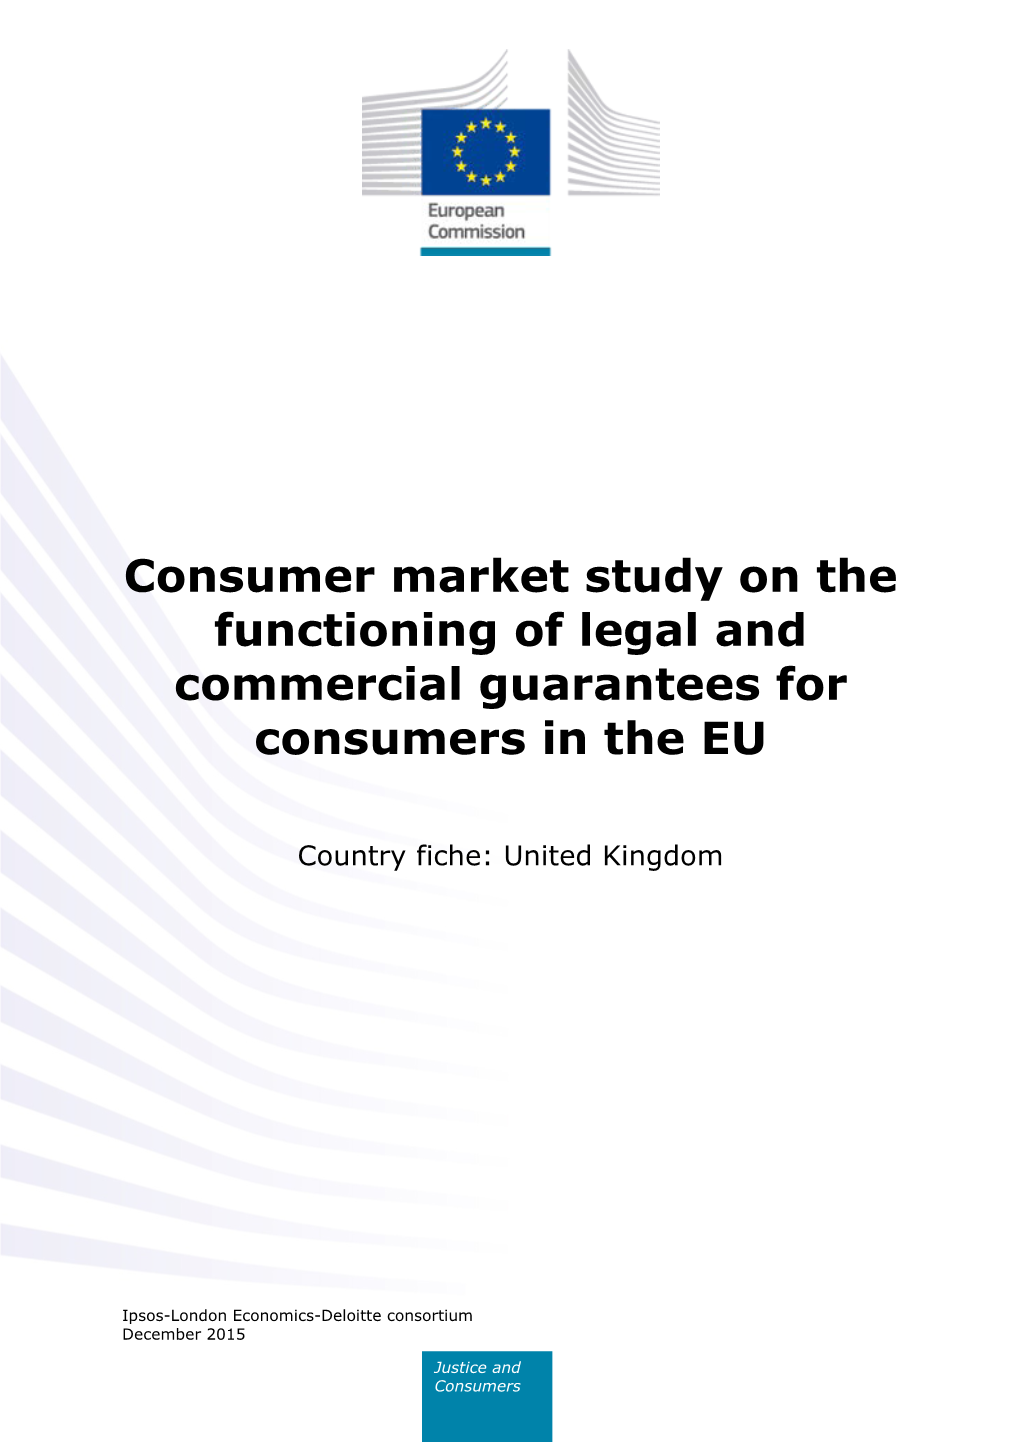 Consumer Market Study on the Functioning of Legal and Commercial Guarantees for Consumers in the EU